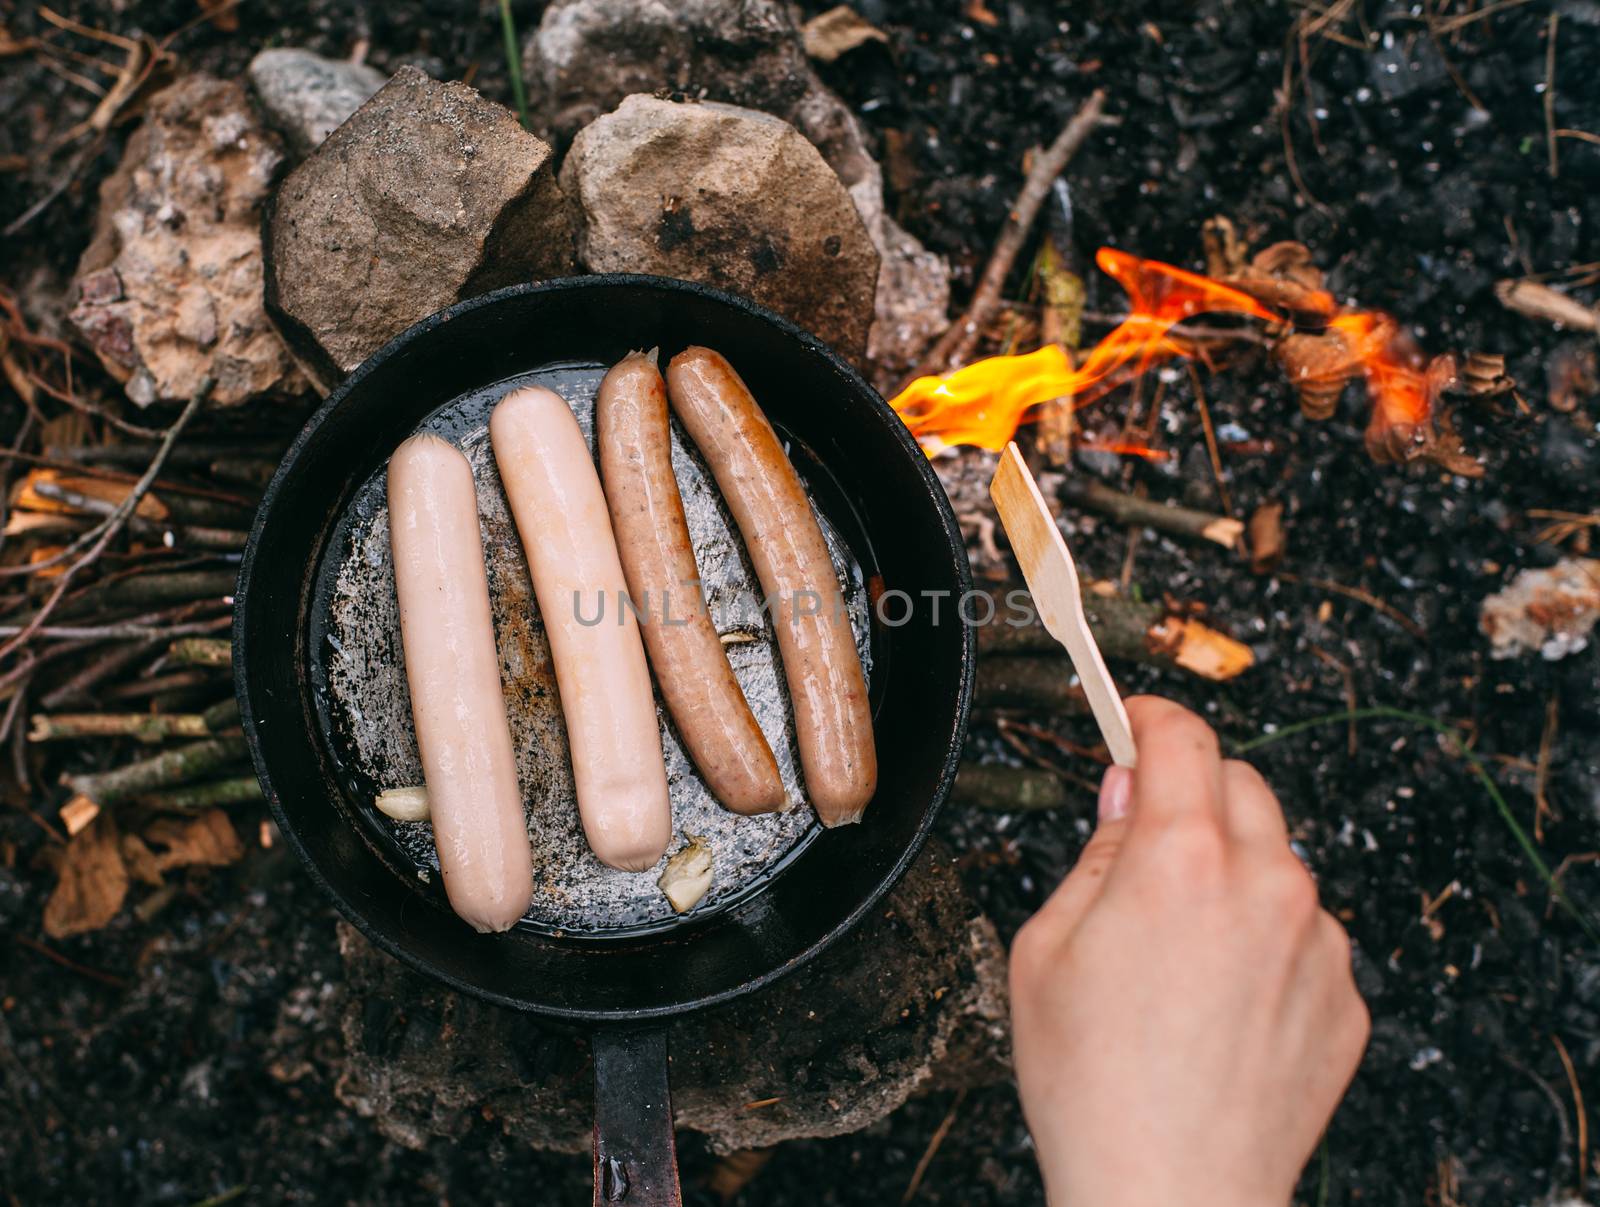 Roasting sausages in a frying pan over an open fire. Preparing food in nature. Lunch in the open air. Hand with a wooden shovel. Picnic in the forest. Food on fire